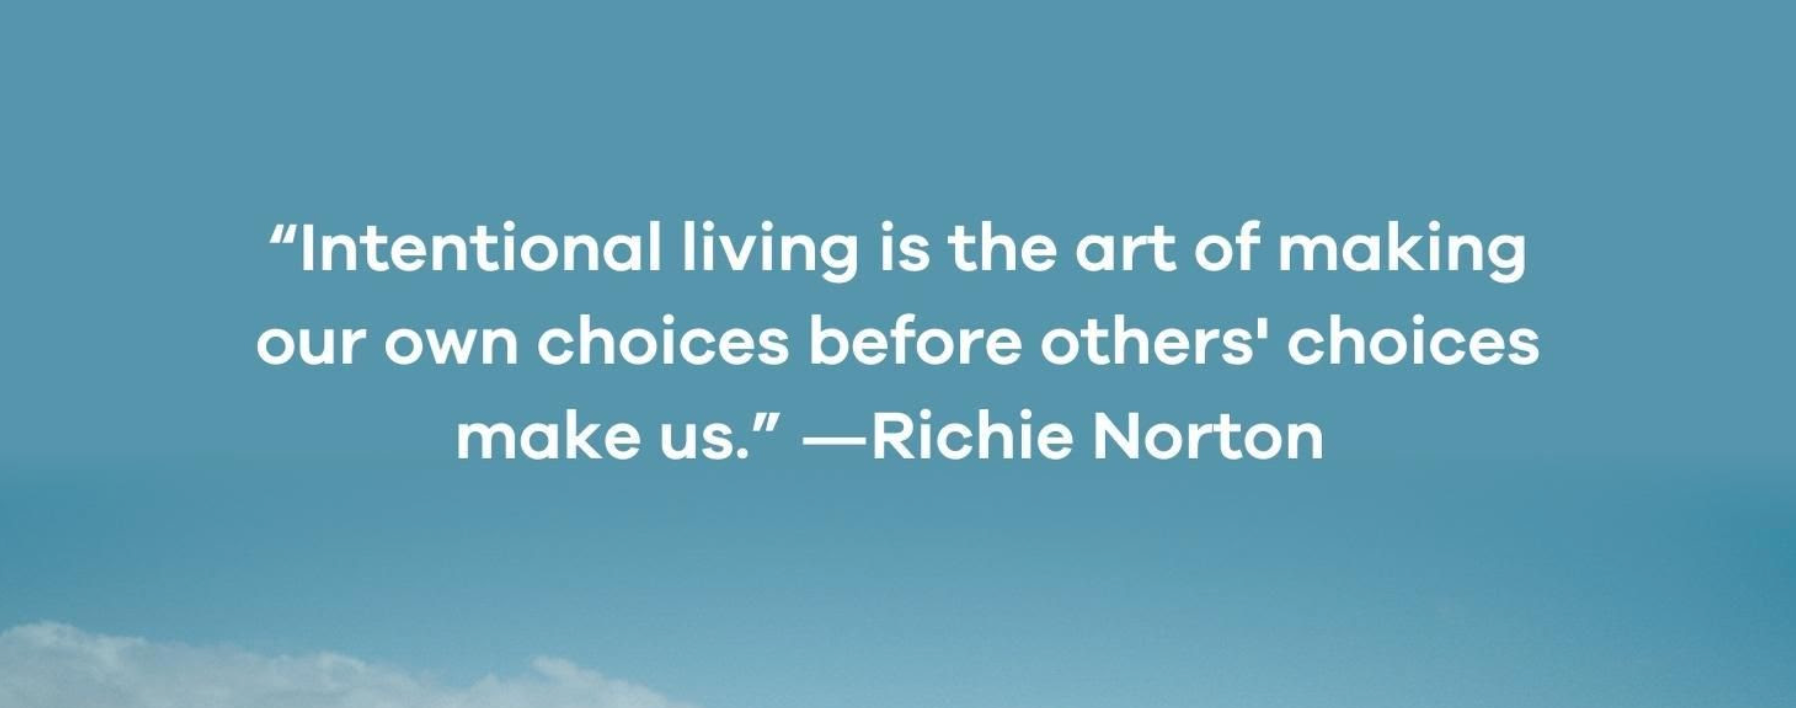 Richie Norton quote "Intentional living is the art of making our own choices before others' choices make us."